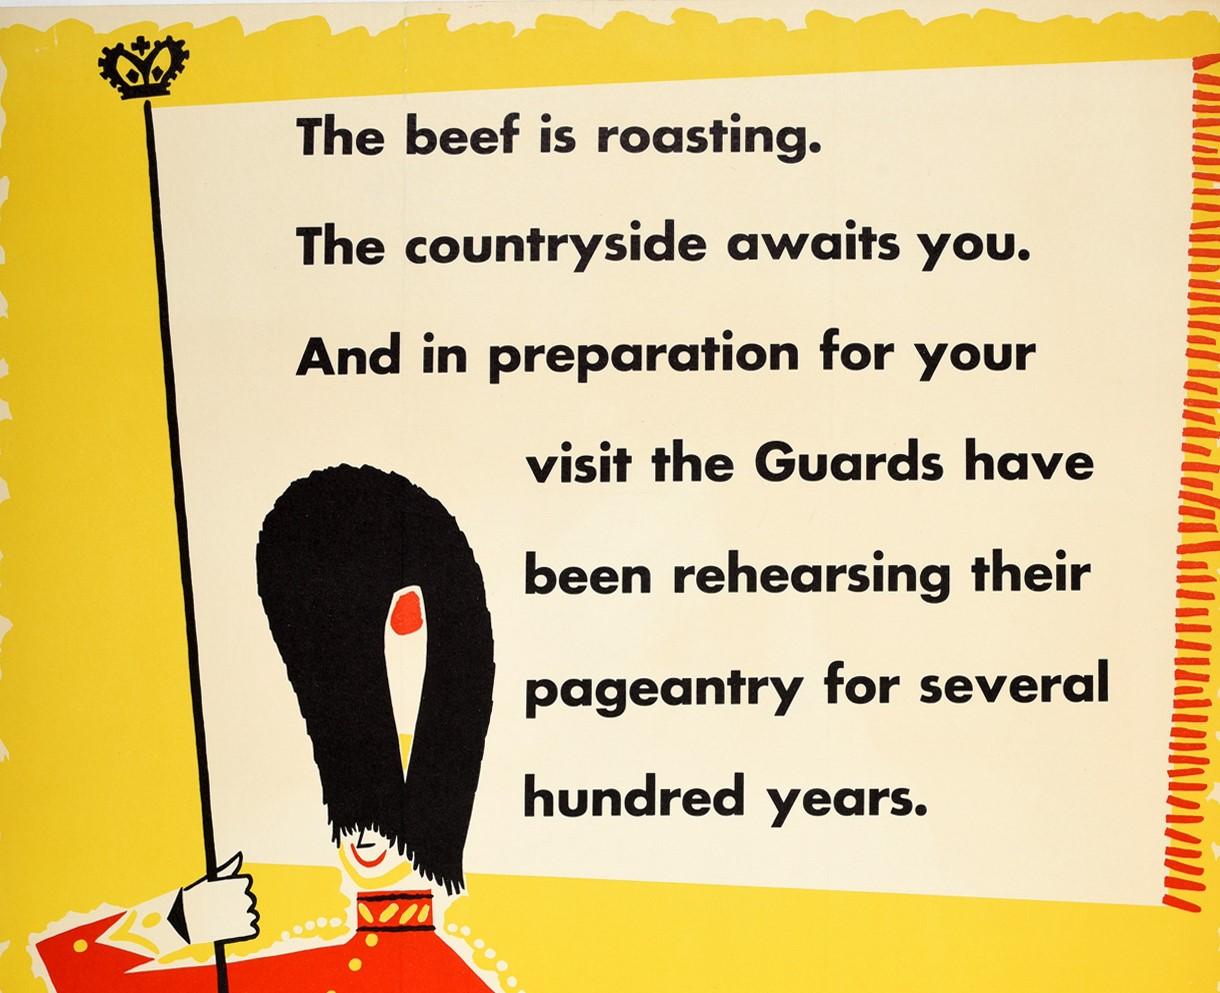 Original vintage travel poster published by the British Travel and Holidays Association – Come to Britain for a holiday that's different – featuring a colourful and fun mid-century design depicting a smiling Royal Guard in red and black uniform